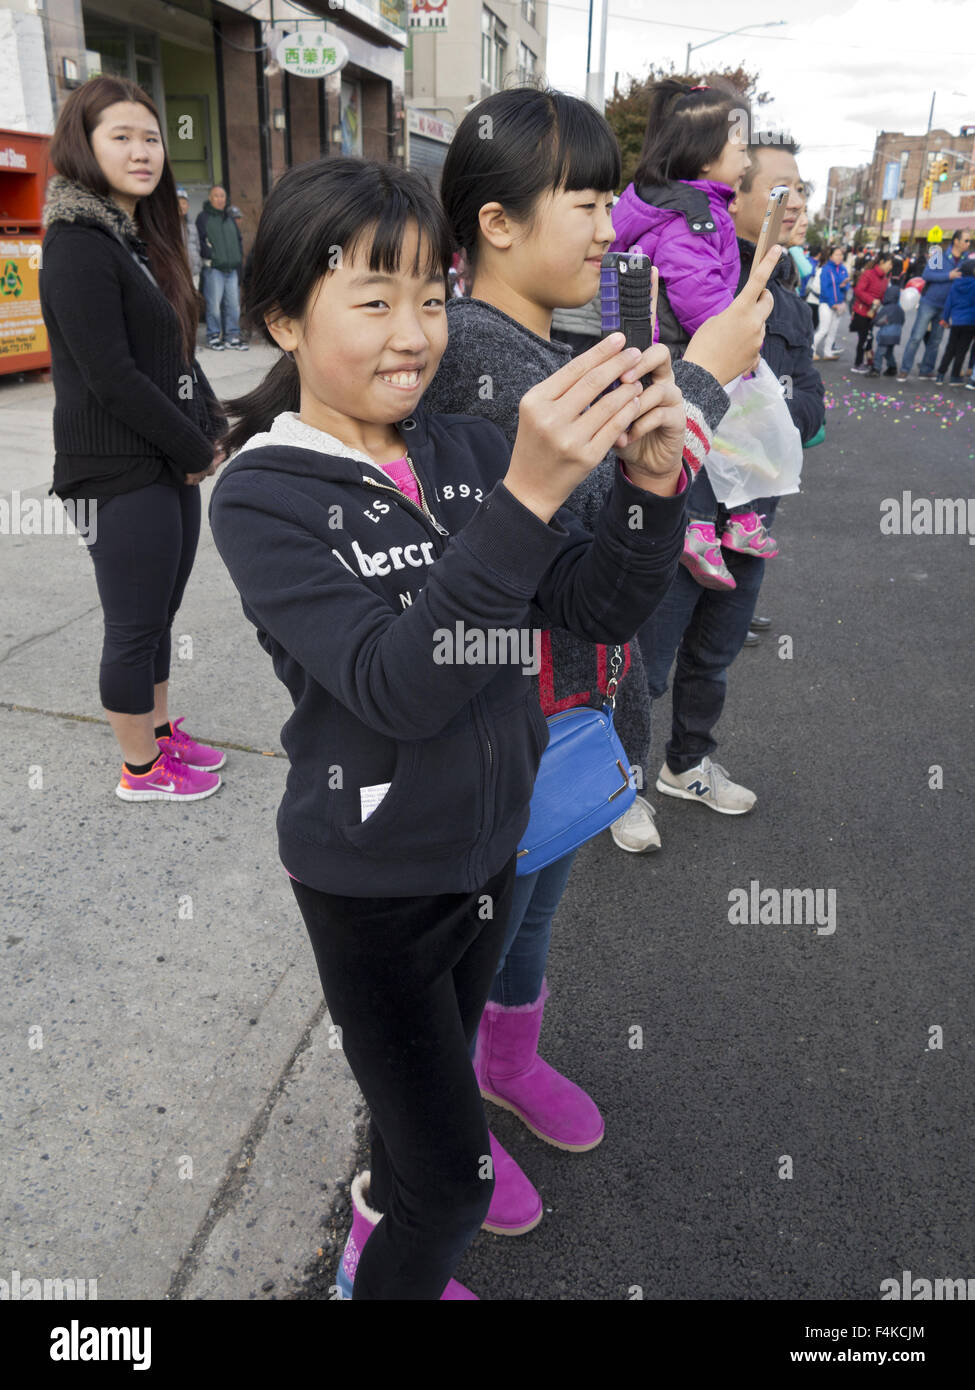 China Day Festival and Lantern Parade in 'Little Chinatown' in Sunset Park in Brooklyn, NY, Oct.18, 2015. Stock Photo